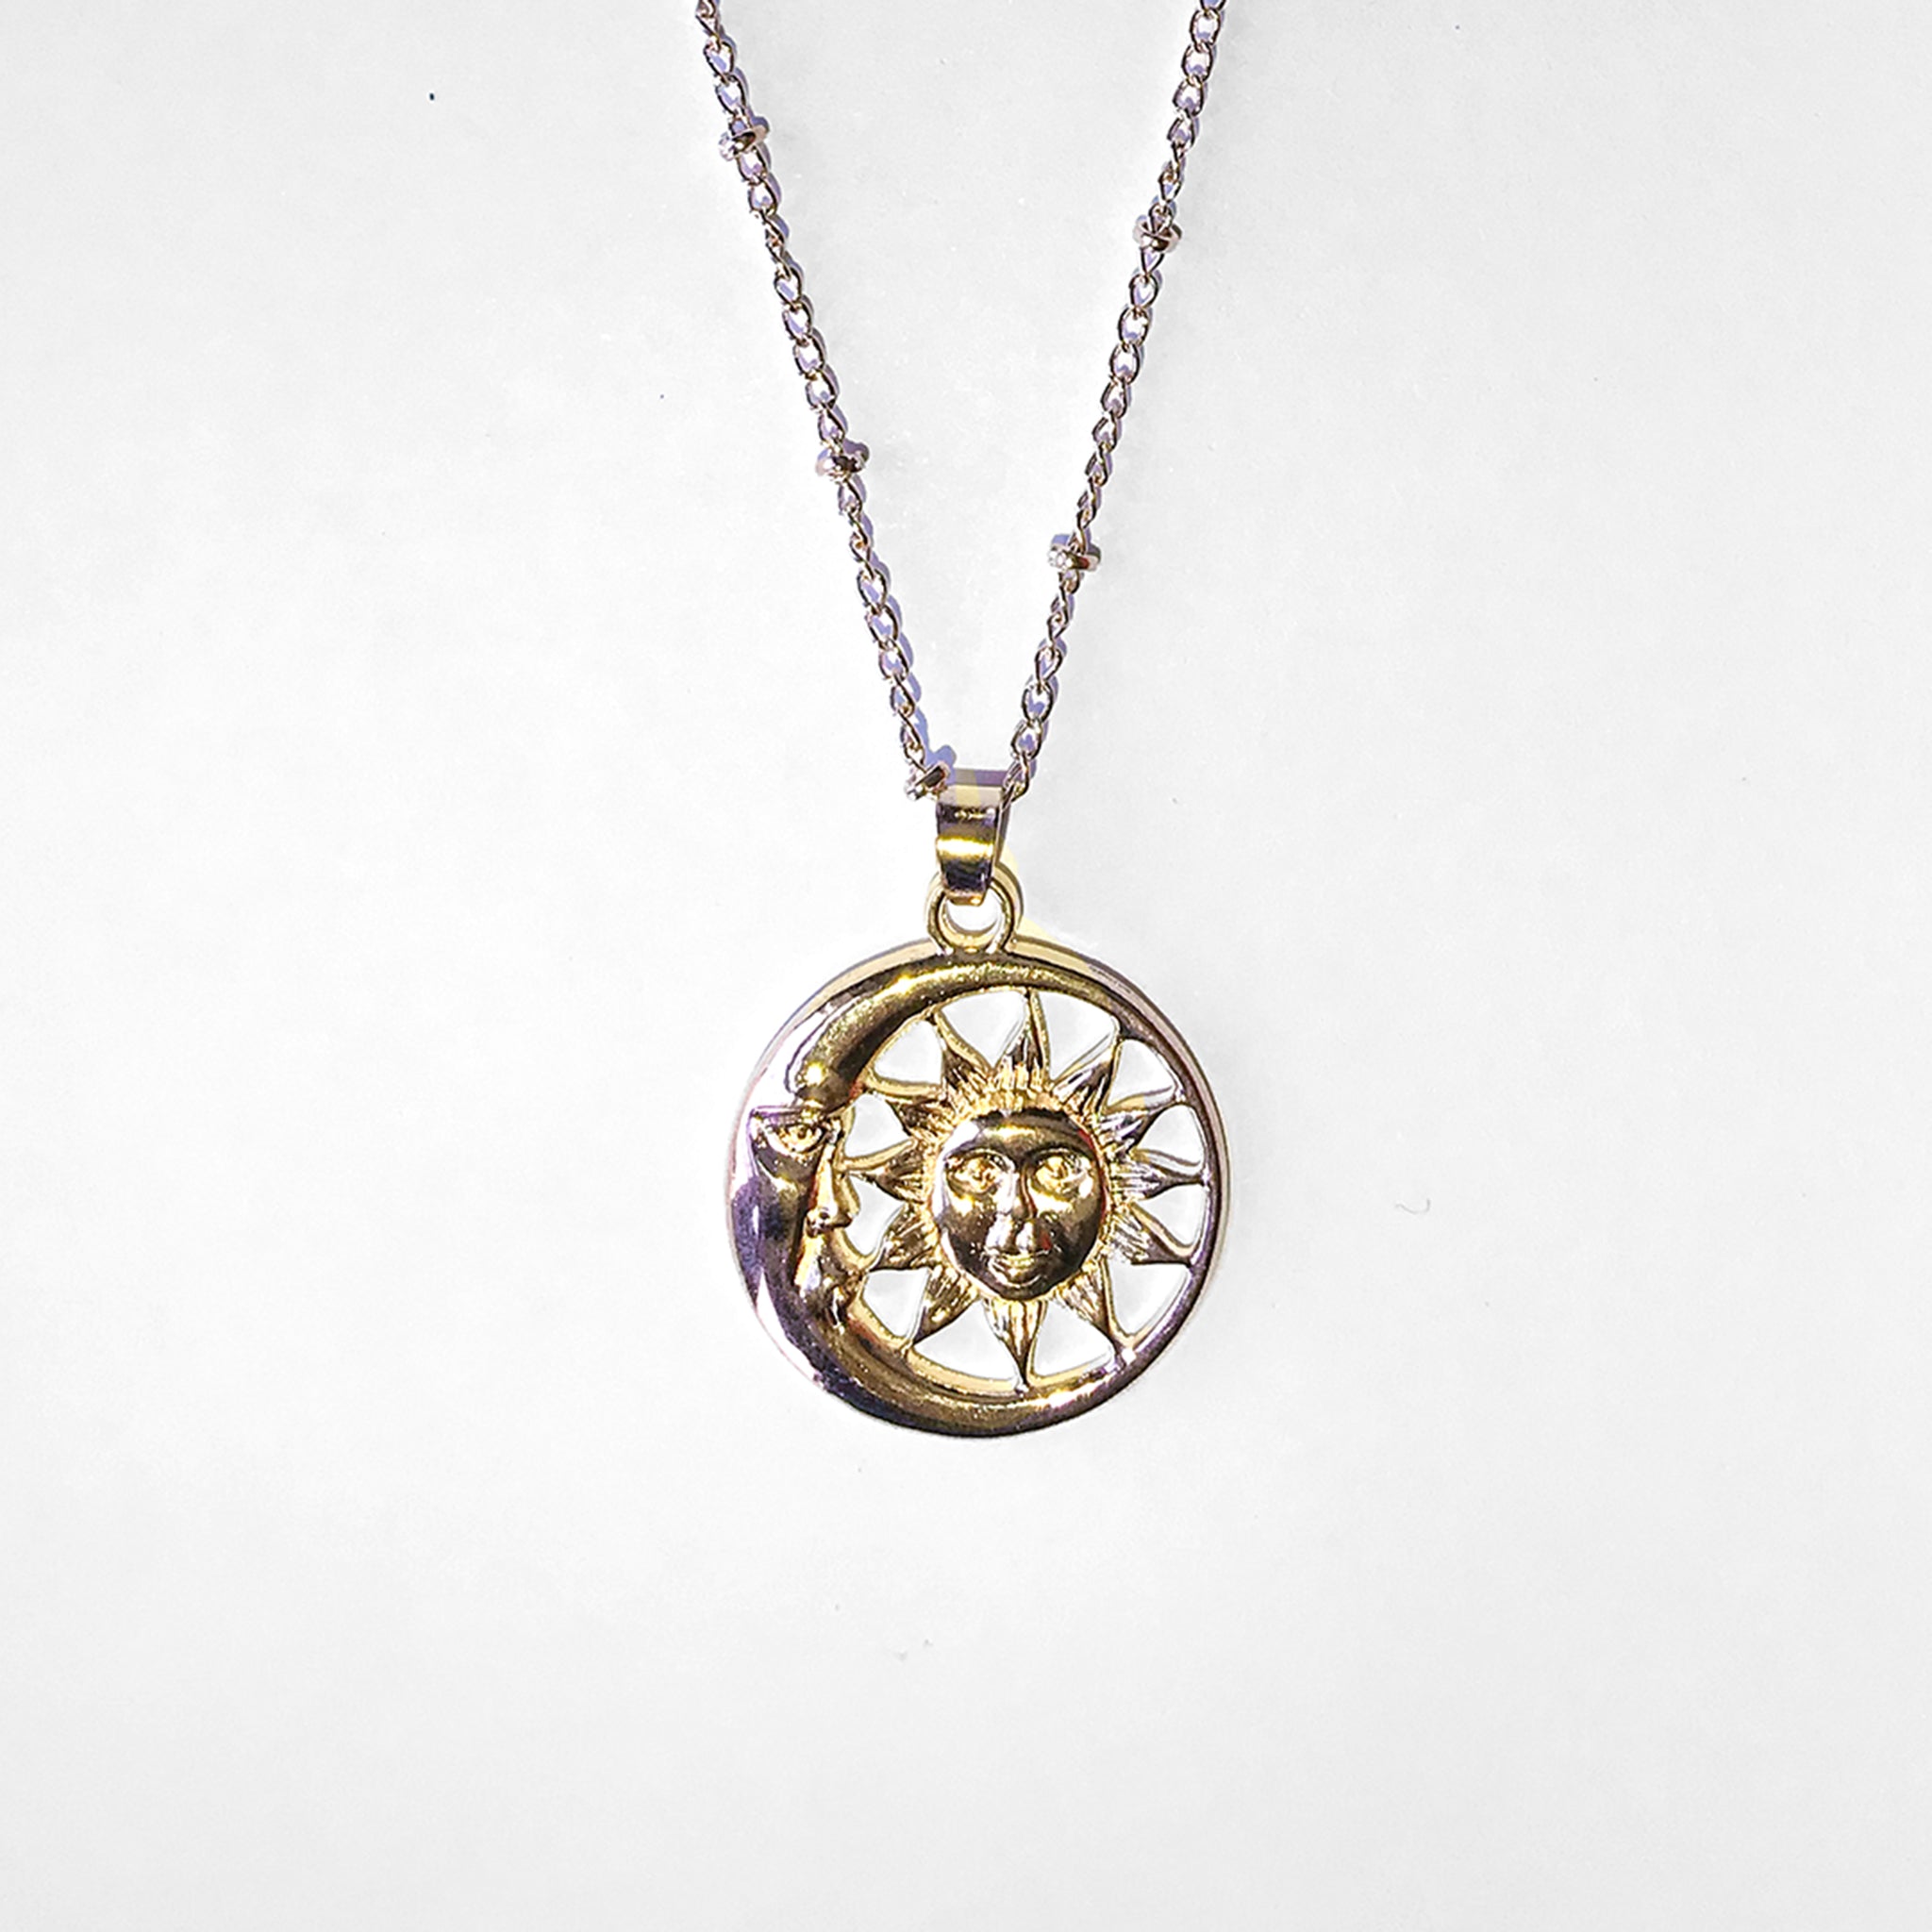 Nymphs New Moon Necklace / 18K Gold-